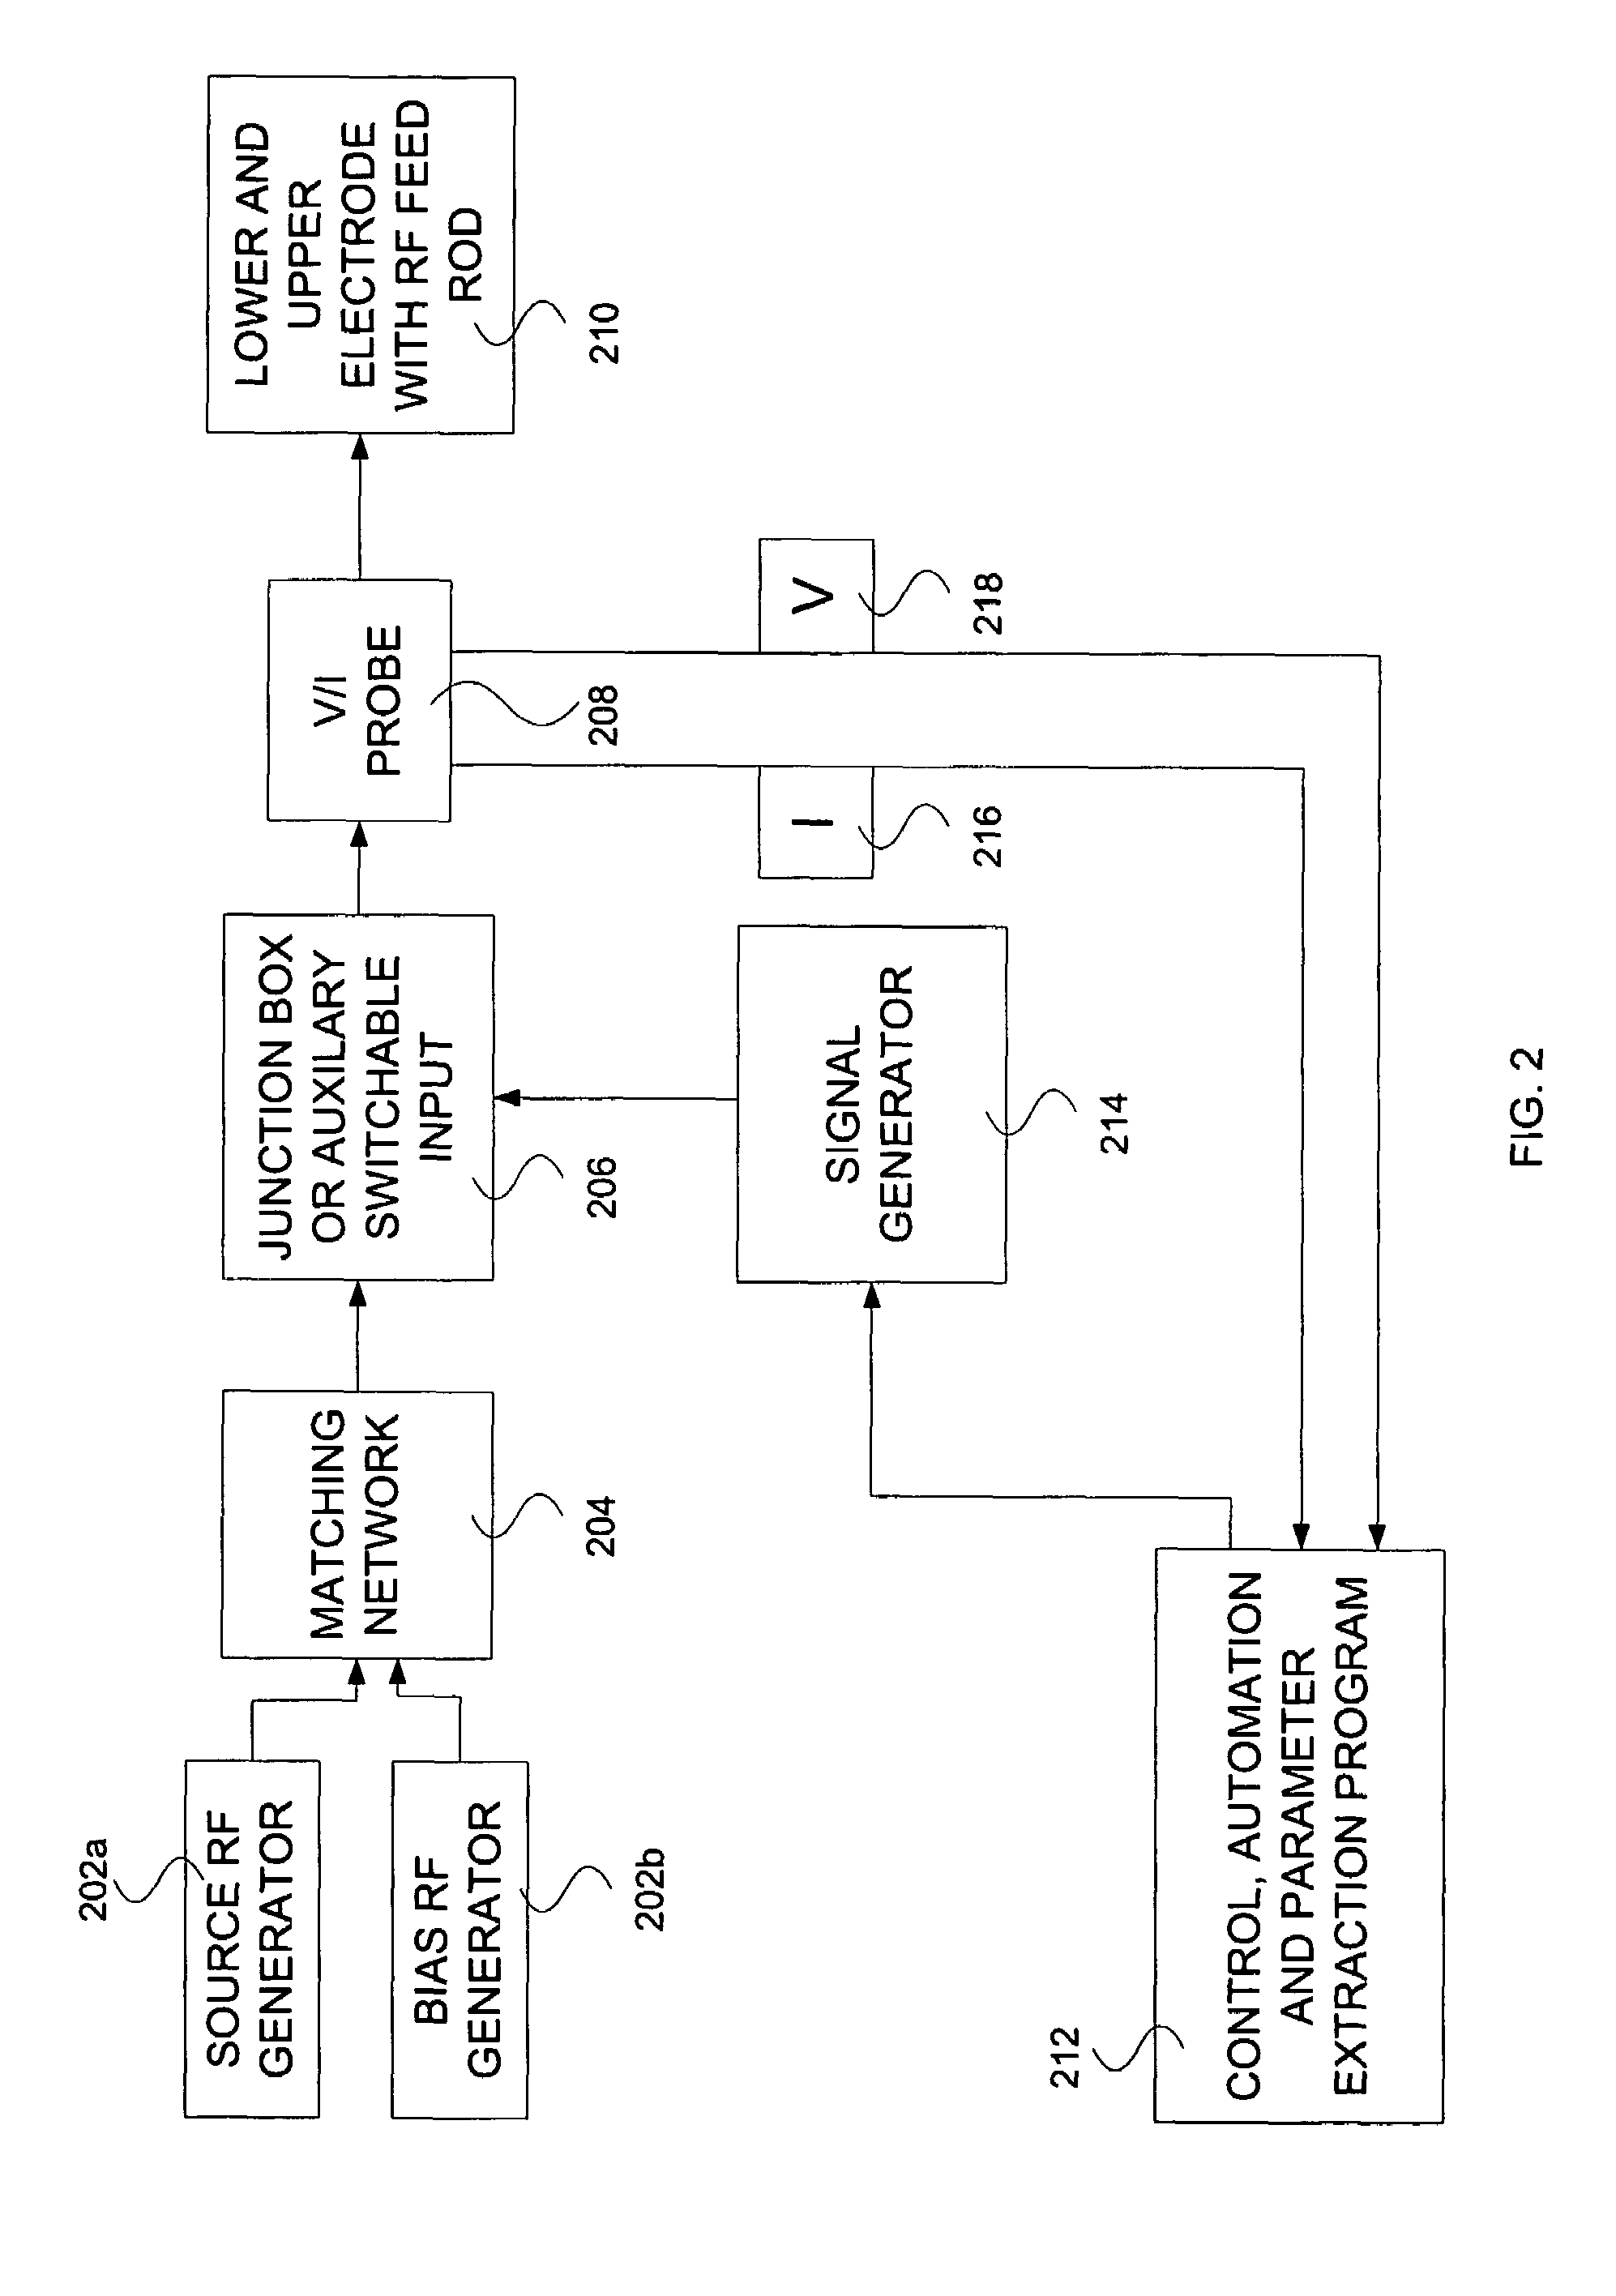 Methods and array for creating a mathematical model of a plasma processing system